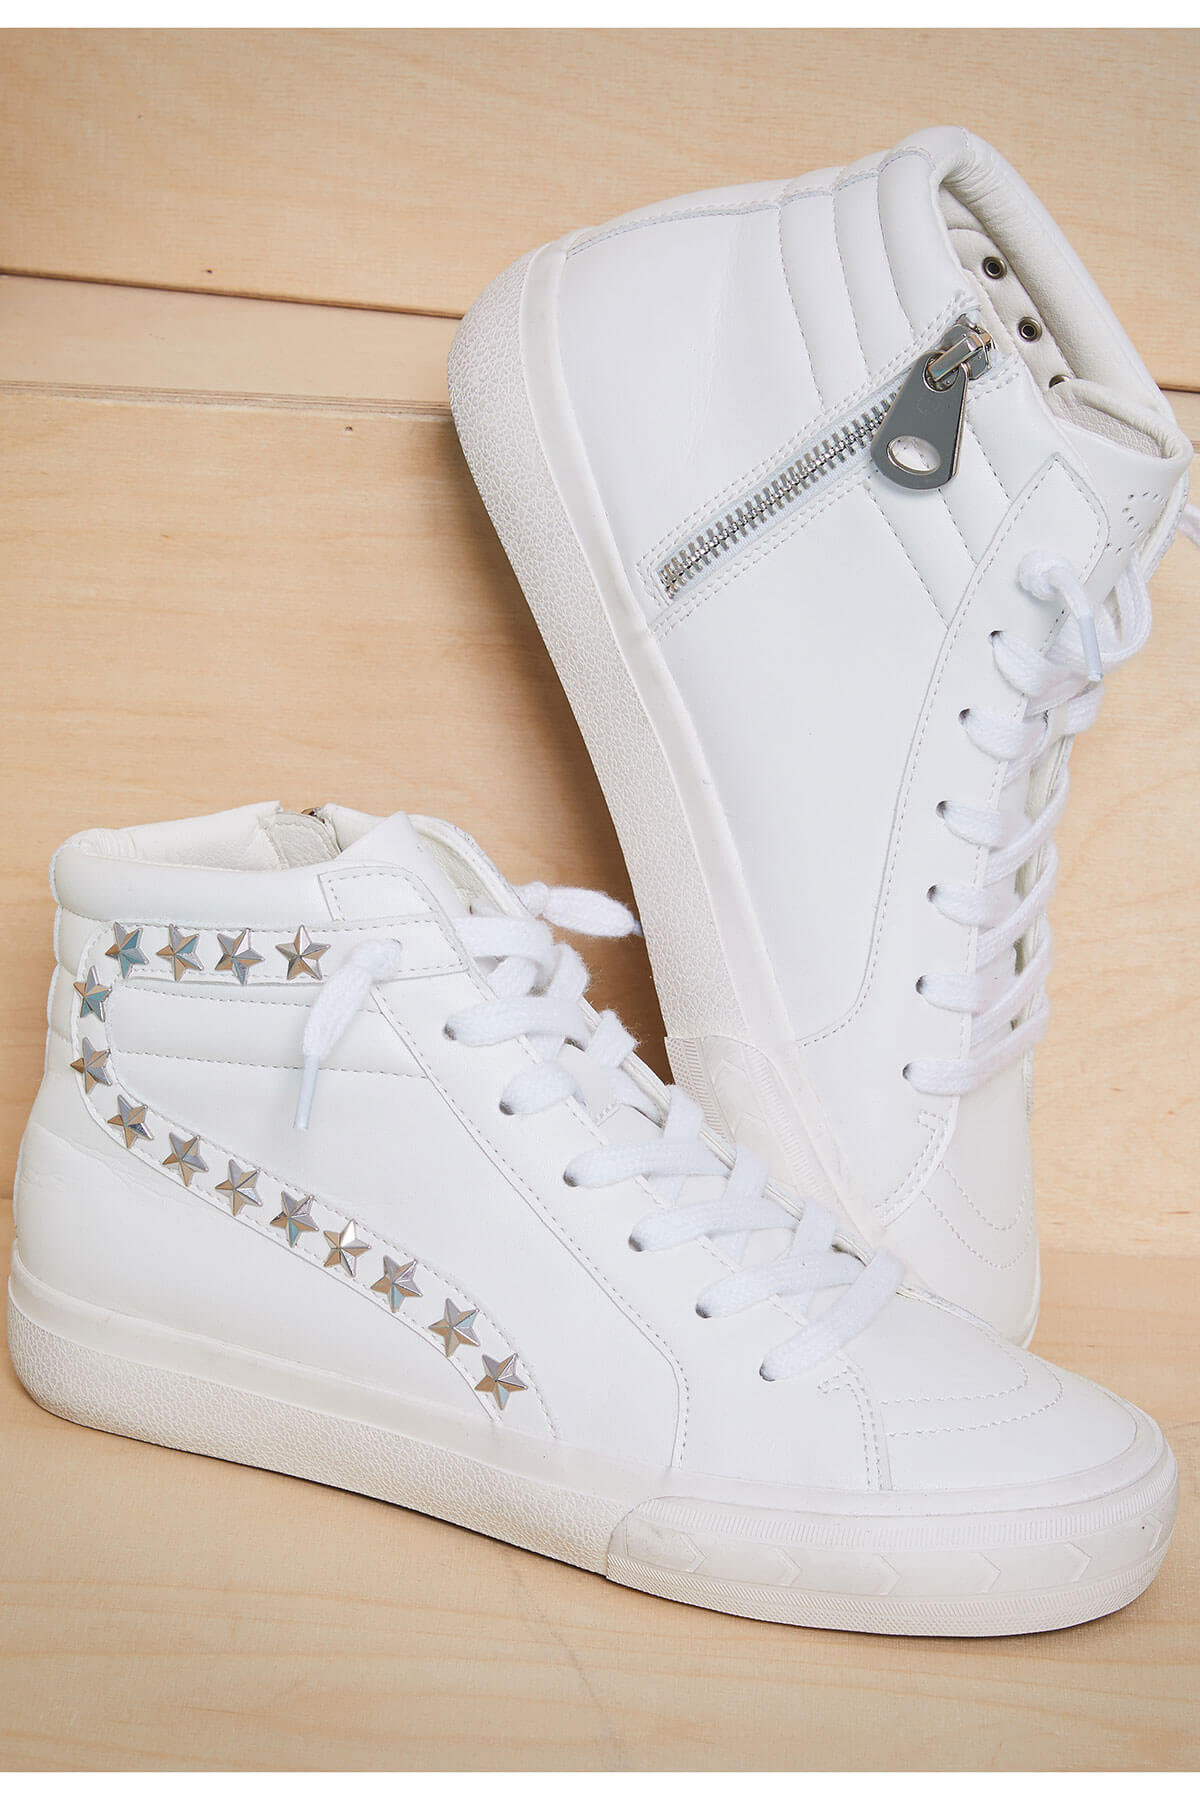 WOMENS LADIES ZIP STUDDED HIGH TOP ANKLE TRAINERS PARTY SNEAKERS WOMEN SHOES